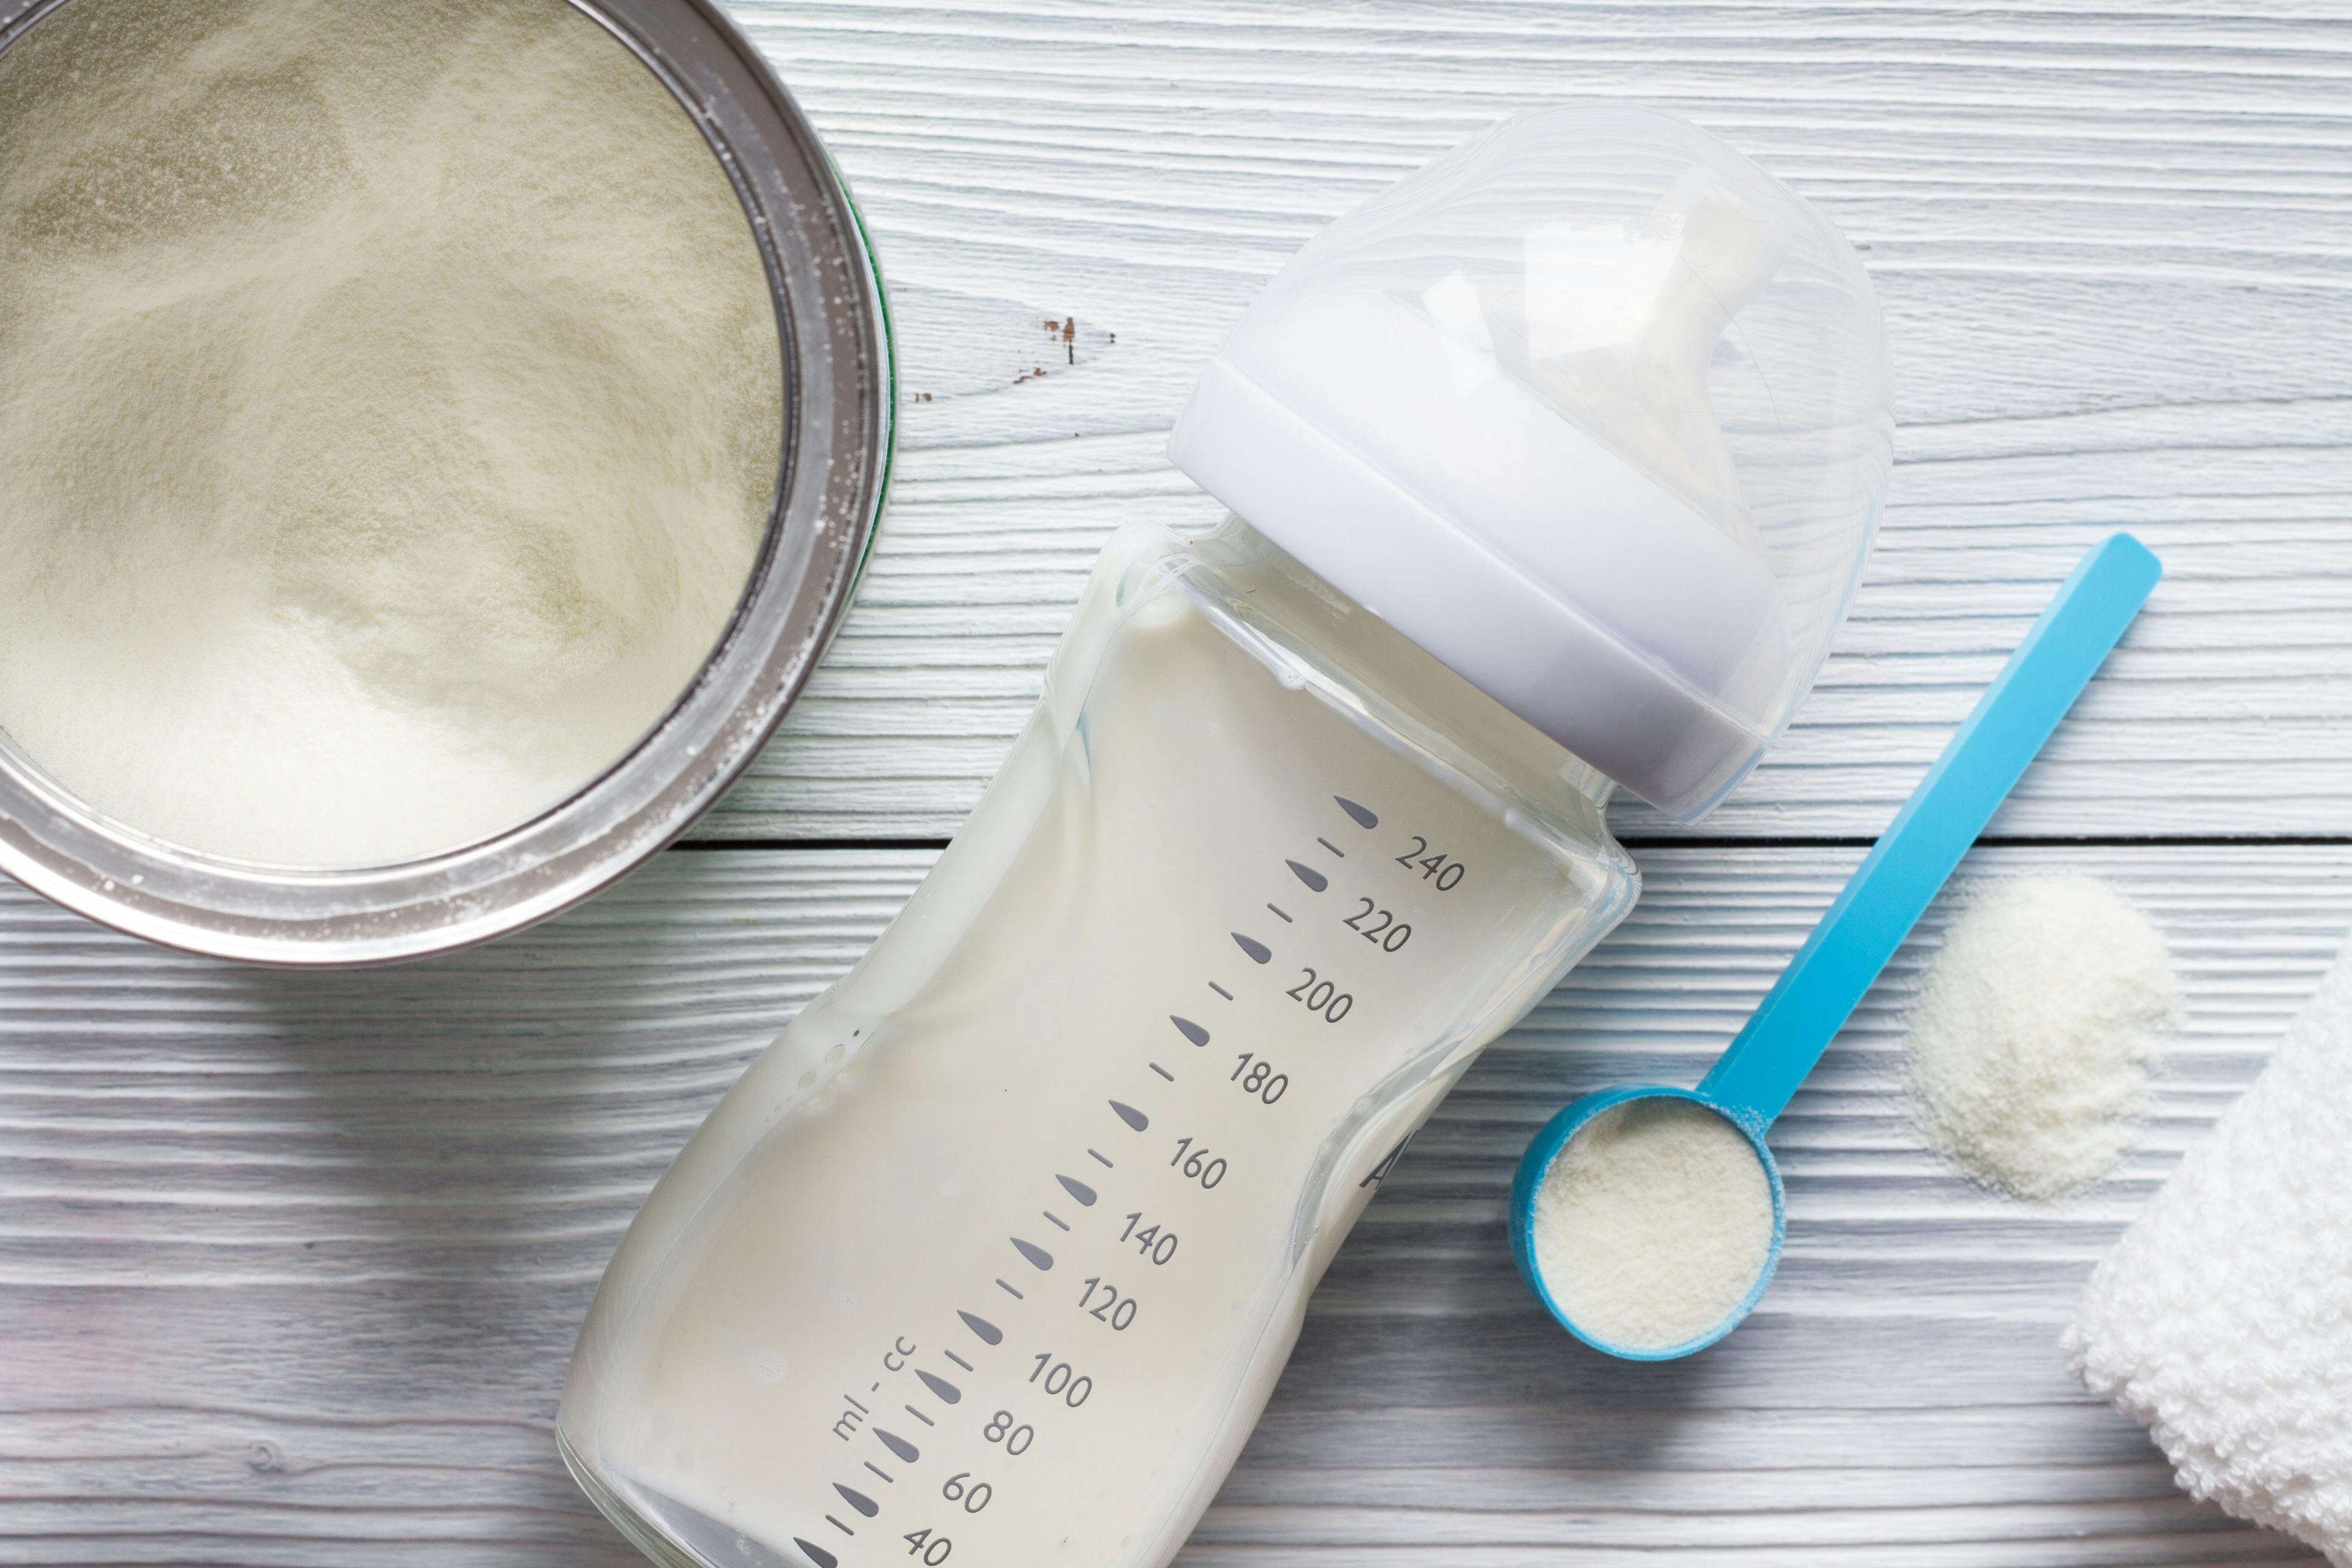 Are infant formula claims substantiated by evidence? | Image Credit: © 279photo - © 279photo - stock.adobe.com.